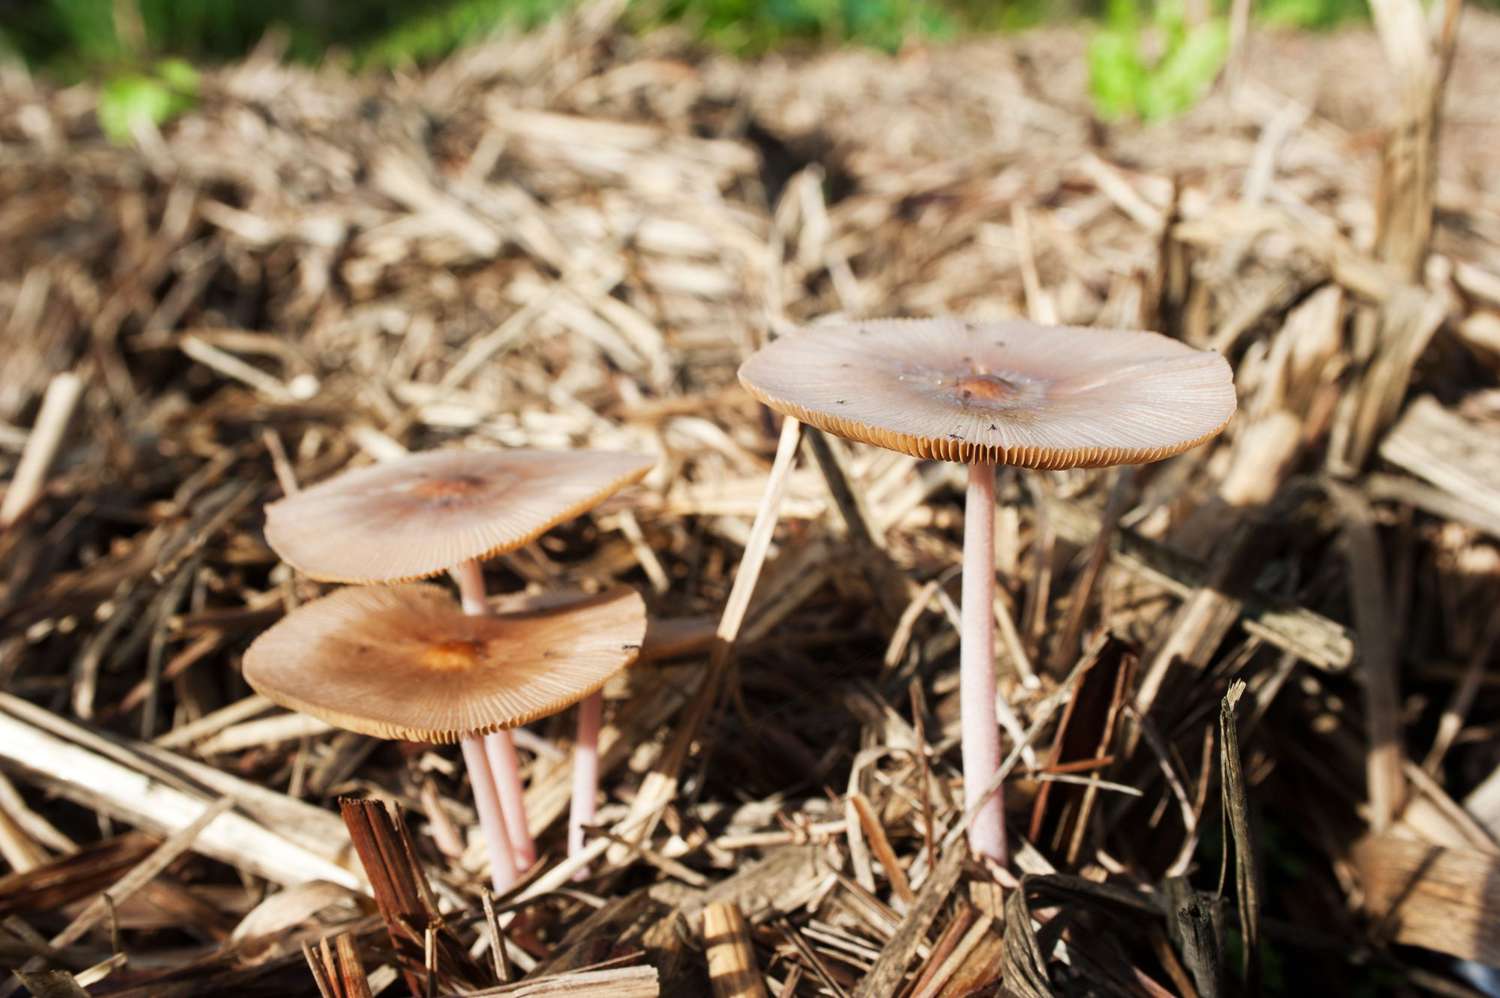 mushrooms growing out of mulch bed